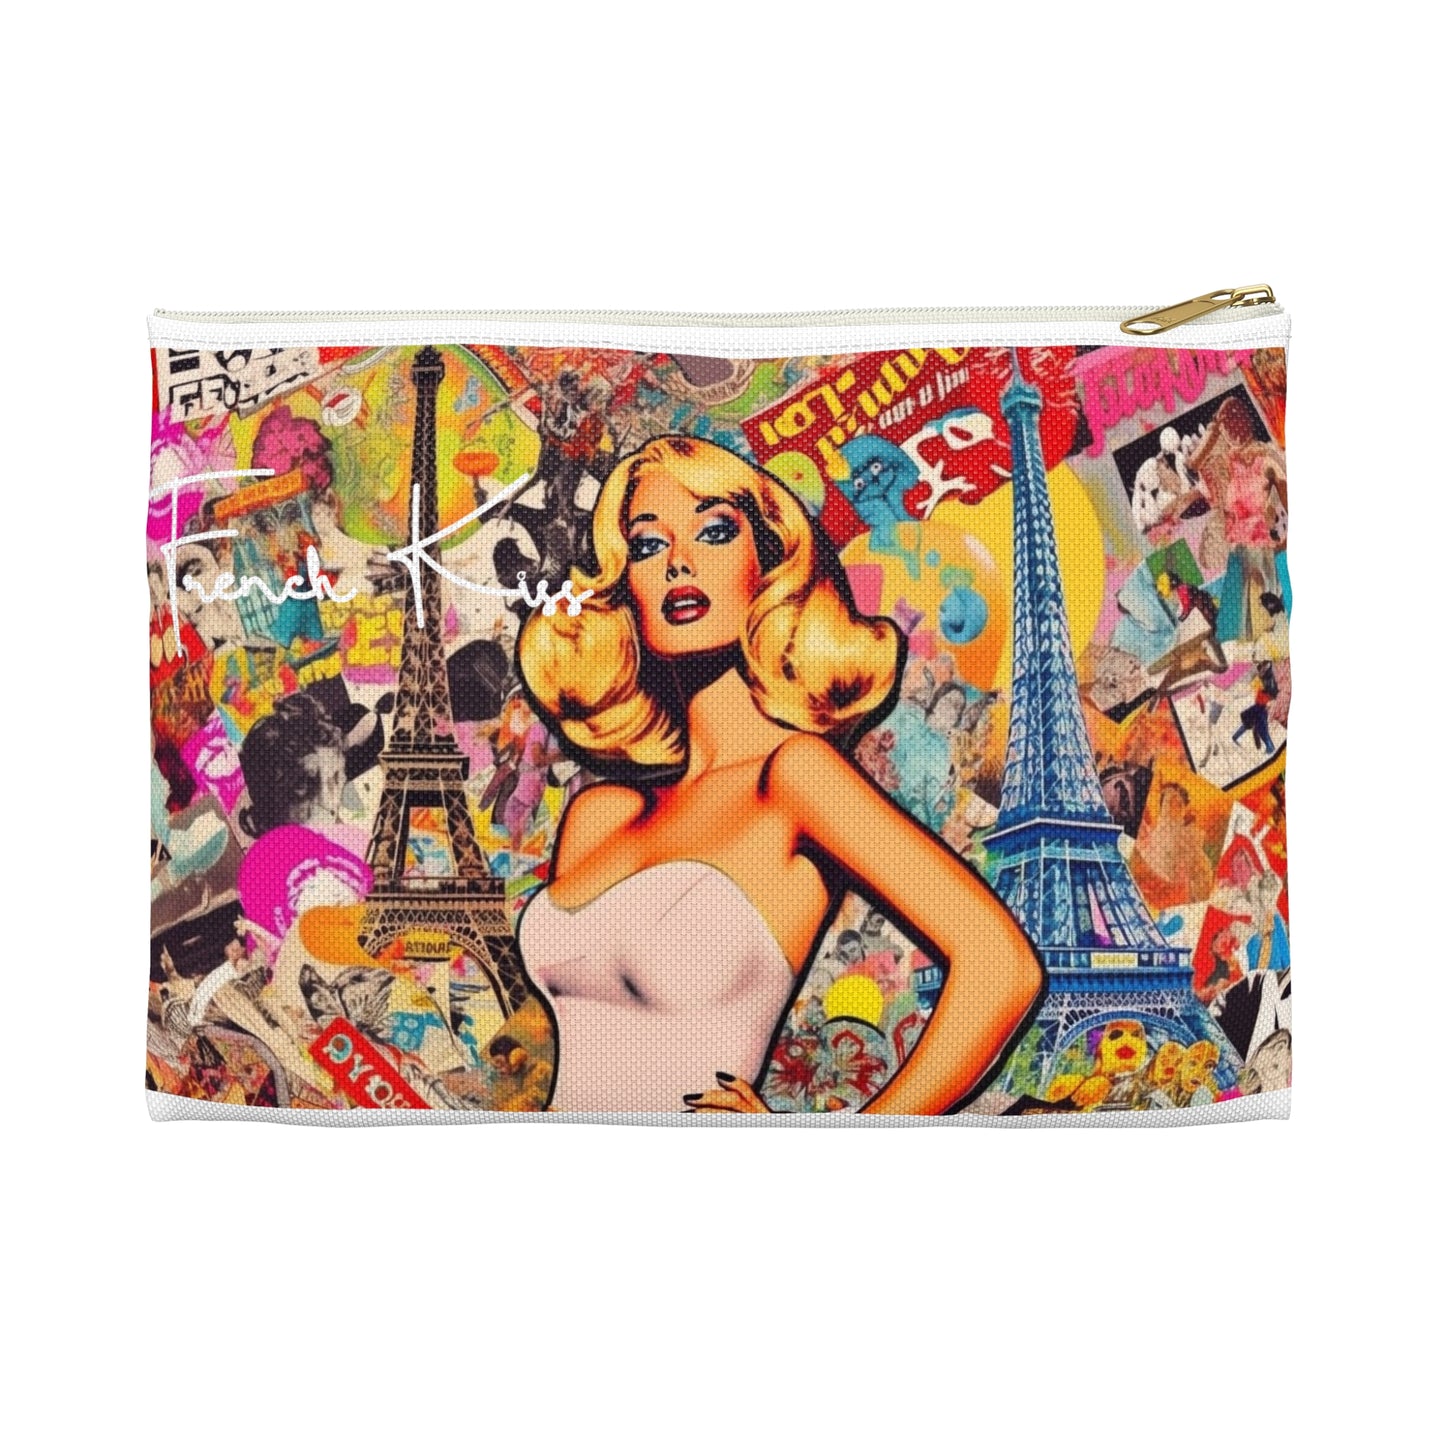 LE POP - French Kiss Pop Art, Classy, Accessory Bag, Couture, Travel, Fashion, Beauty, must have gift item, Pouch